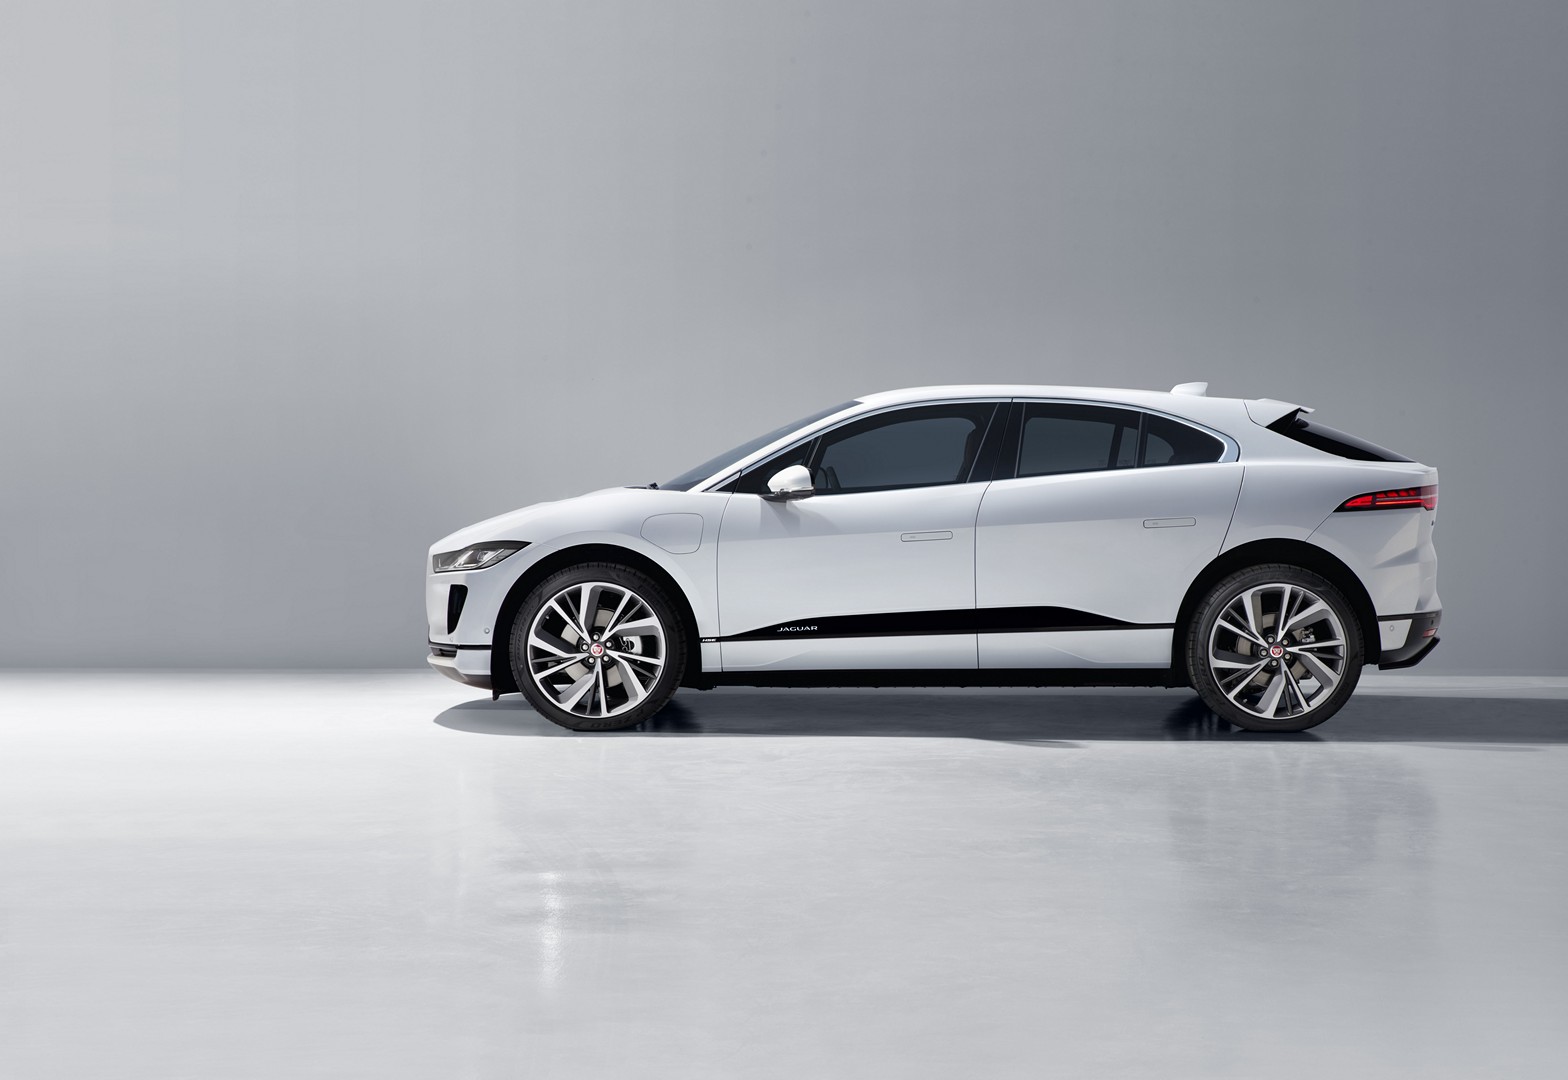 https://s1.cdn.autoevolution.com/images/news/gallery/2020-jaguar-i-pace-update-offers-234-miles-of-range-thanks-to-etrophy-know-how_3.jpg